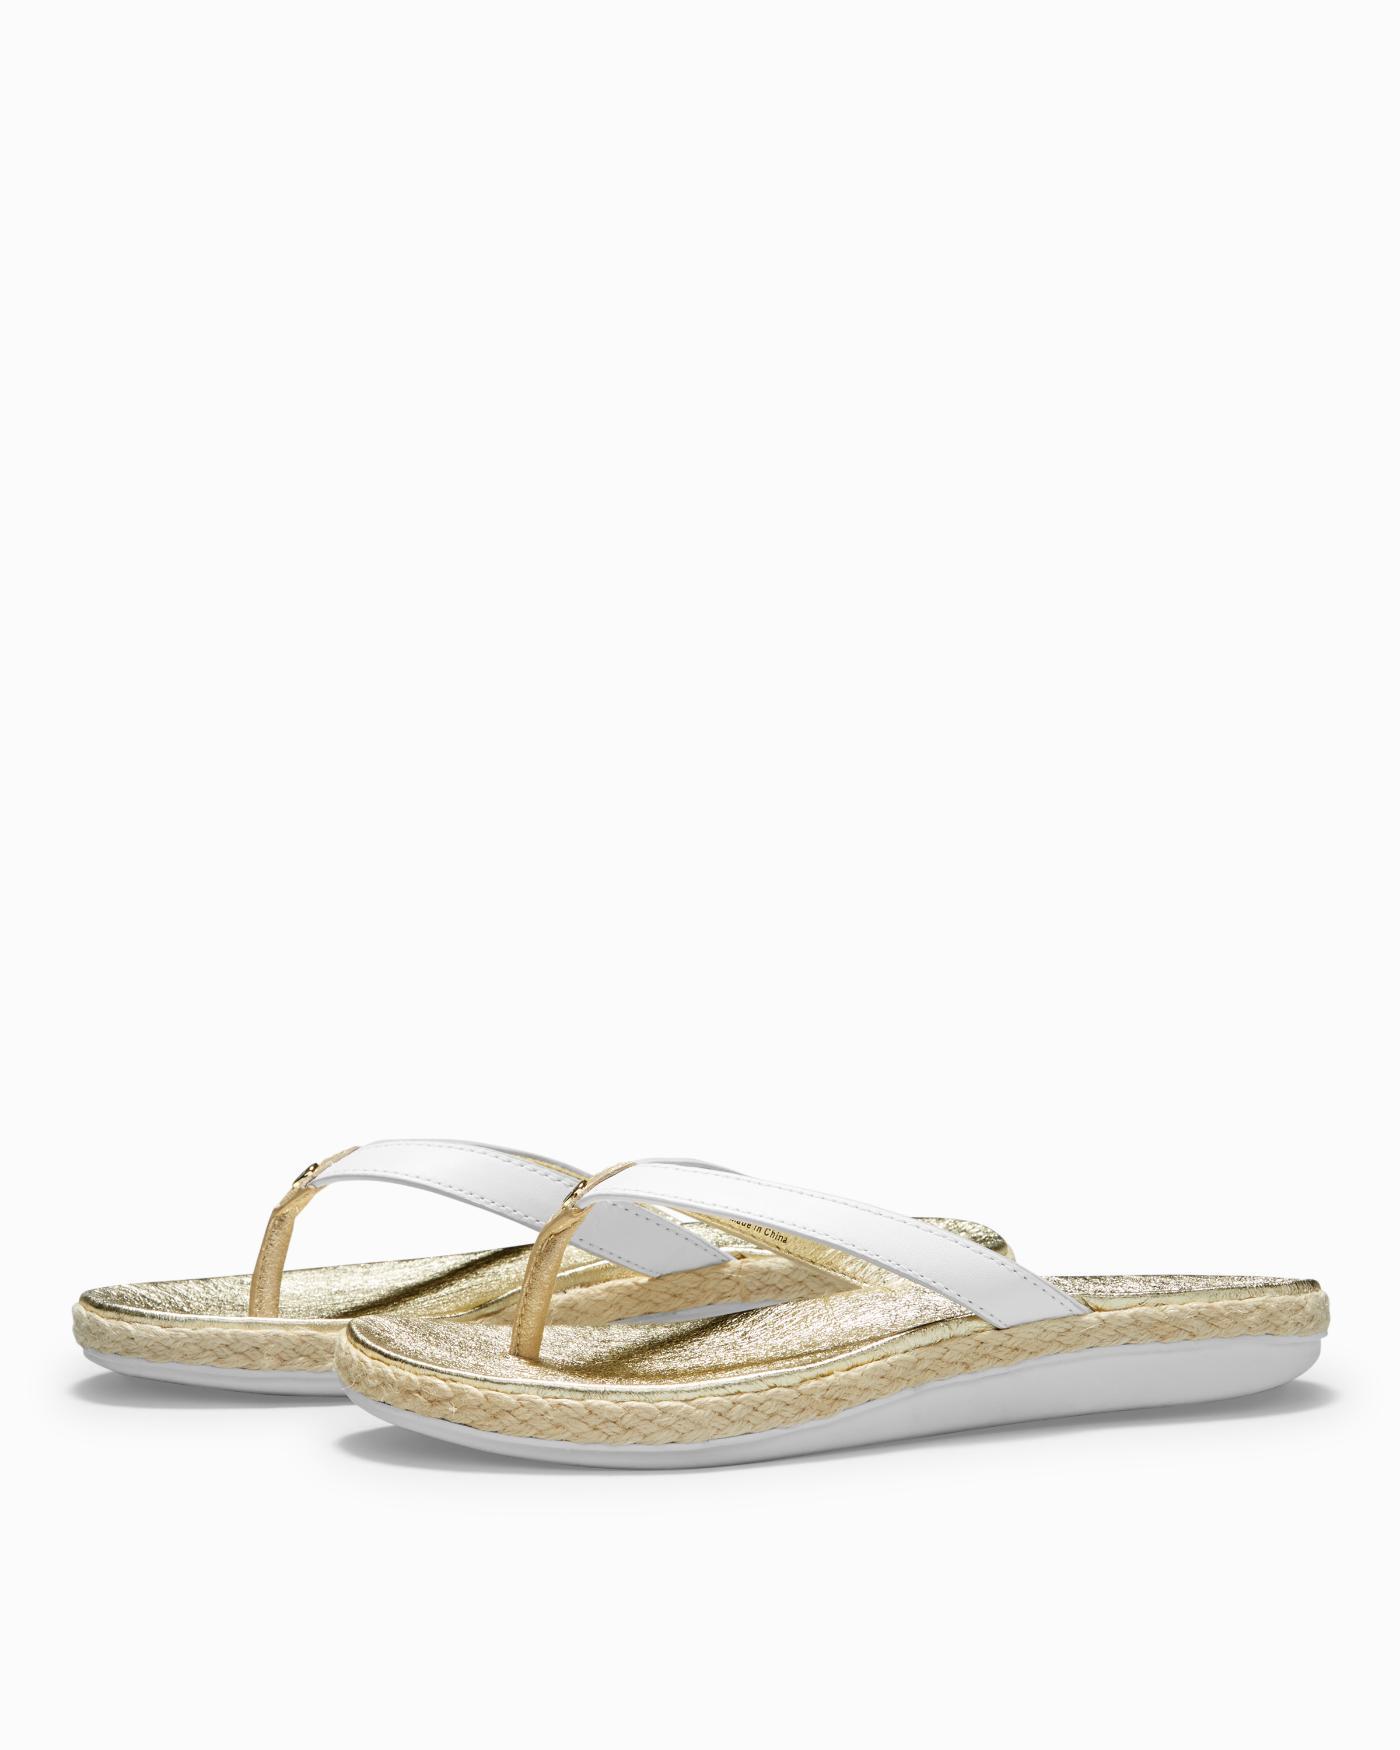 Details about  / J8969 New Women/'s Tommy Bahama Idell Silver//Gold Relaxolgoy Slide Sandal 9 B